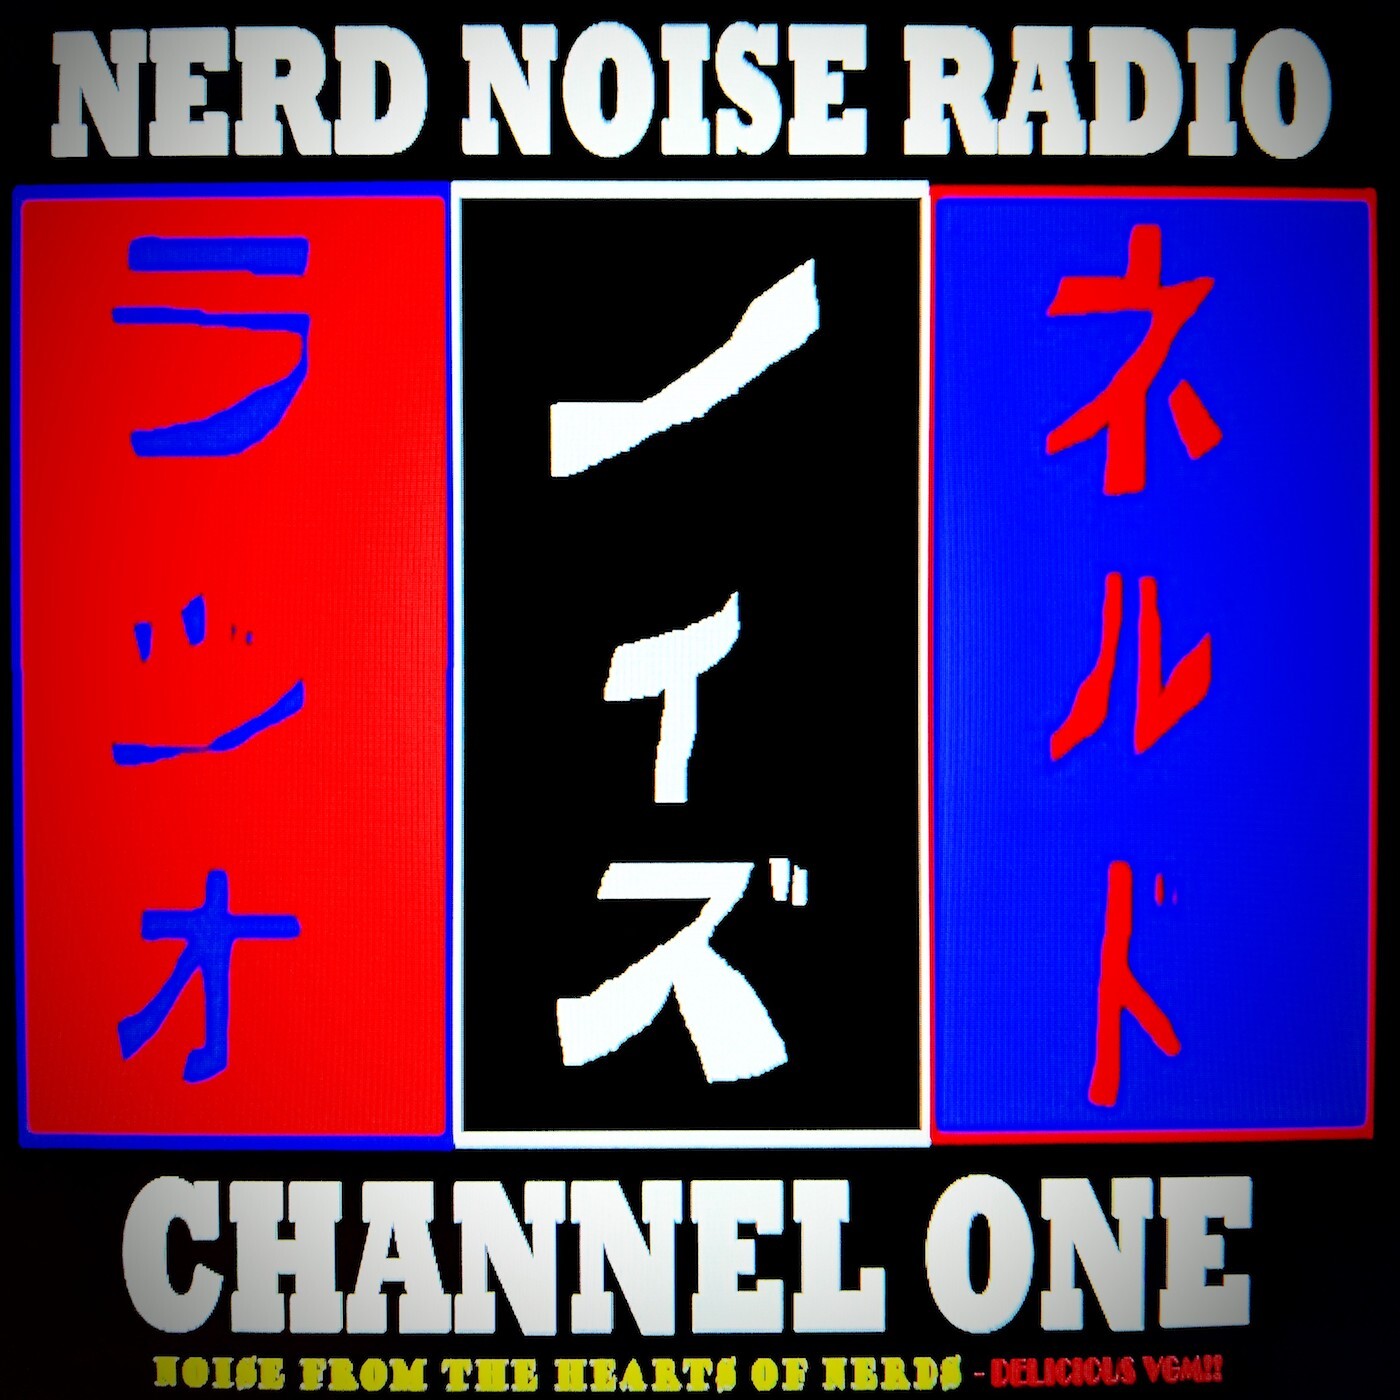 Nerd Noise Radio - Channel 1: ”Noise from the Hearts of Nerds” Podcast - “C1E30: The Big Sounds of the Little Guy - vol. 1.”